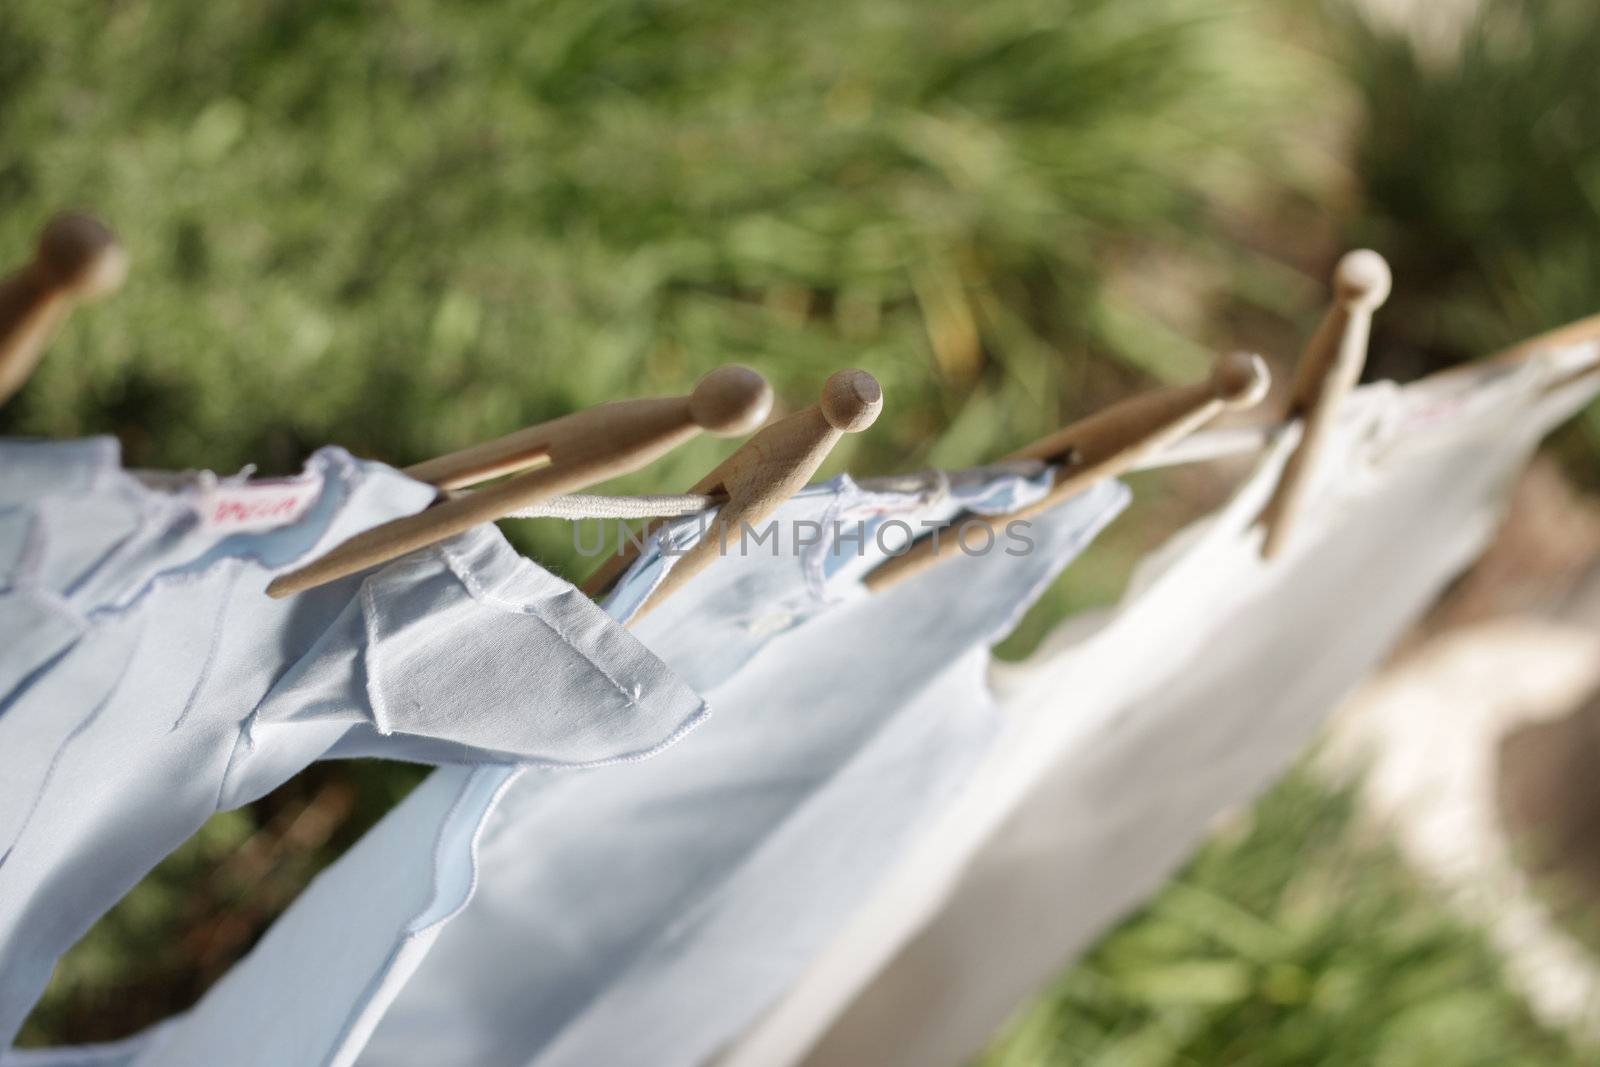 Cute baby clothes drying on a line  by annems